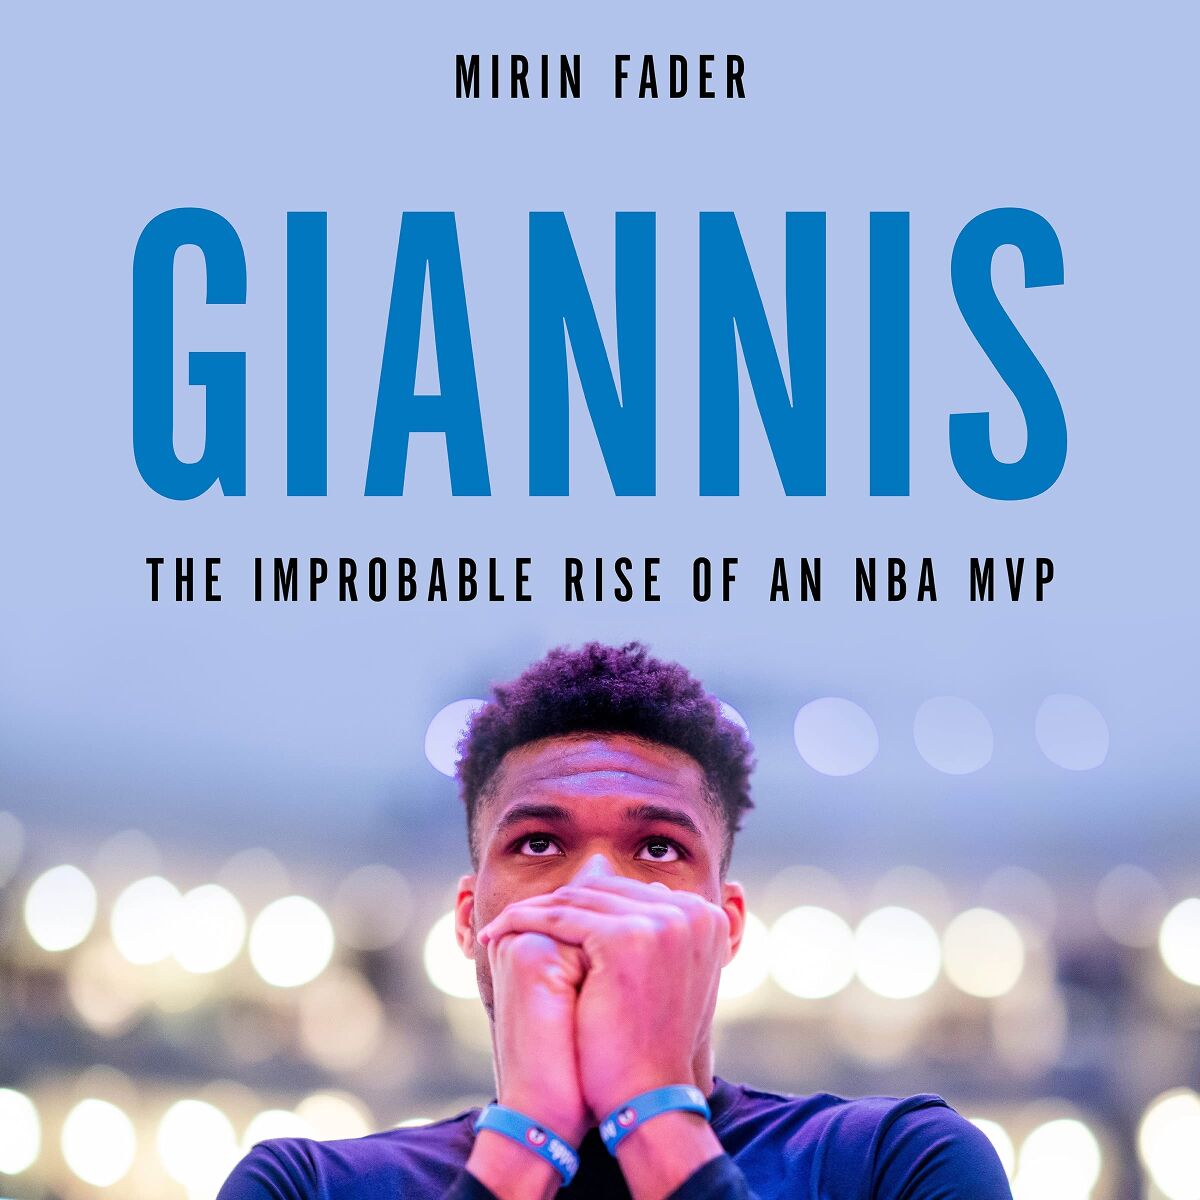 "Giannis: The Improbable Rise of an NBA MVP" by Mirin Fader